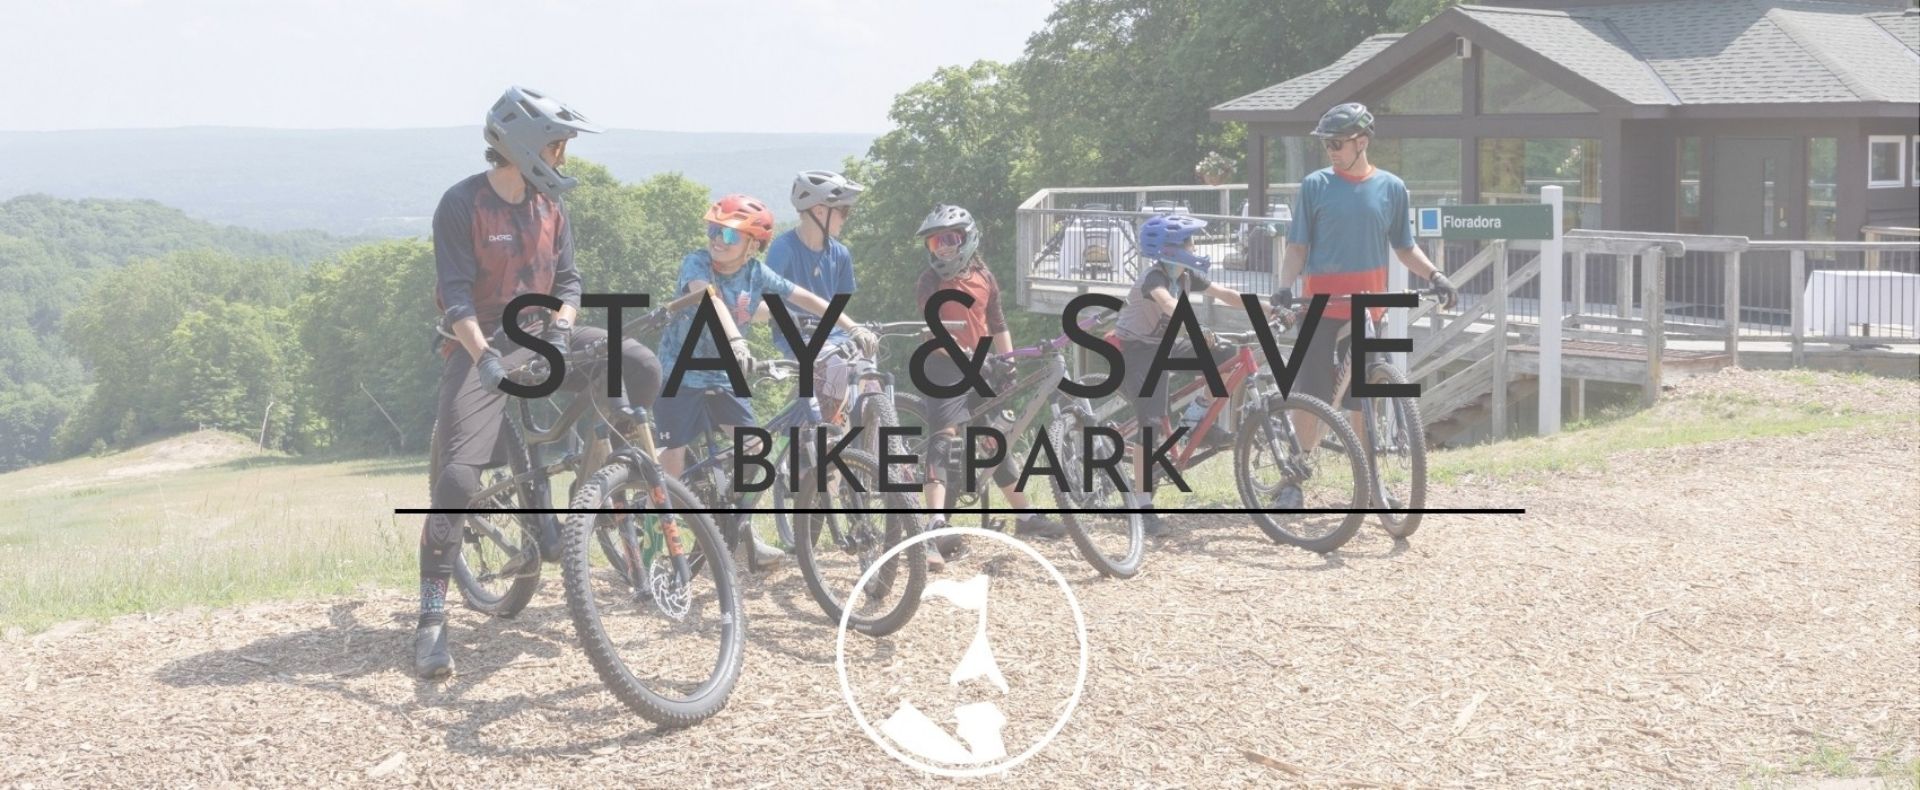 Bike Park Stay and Save at The Highlands	